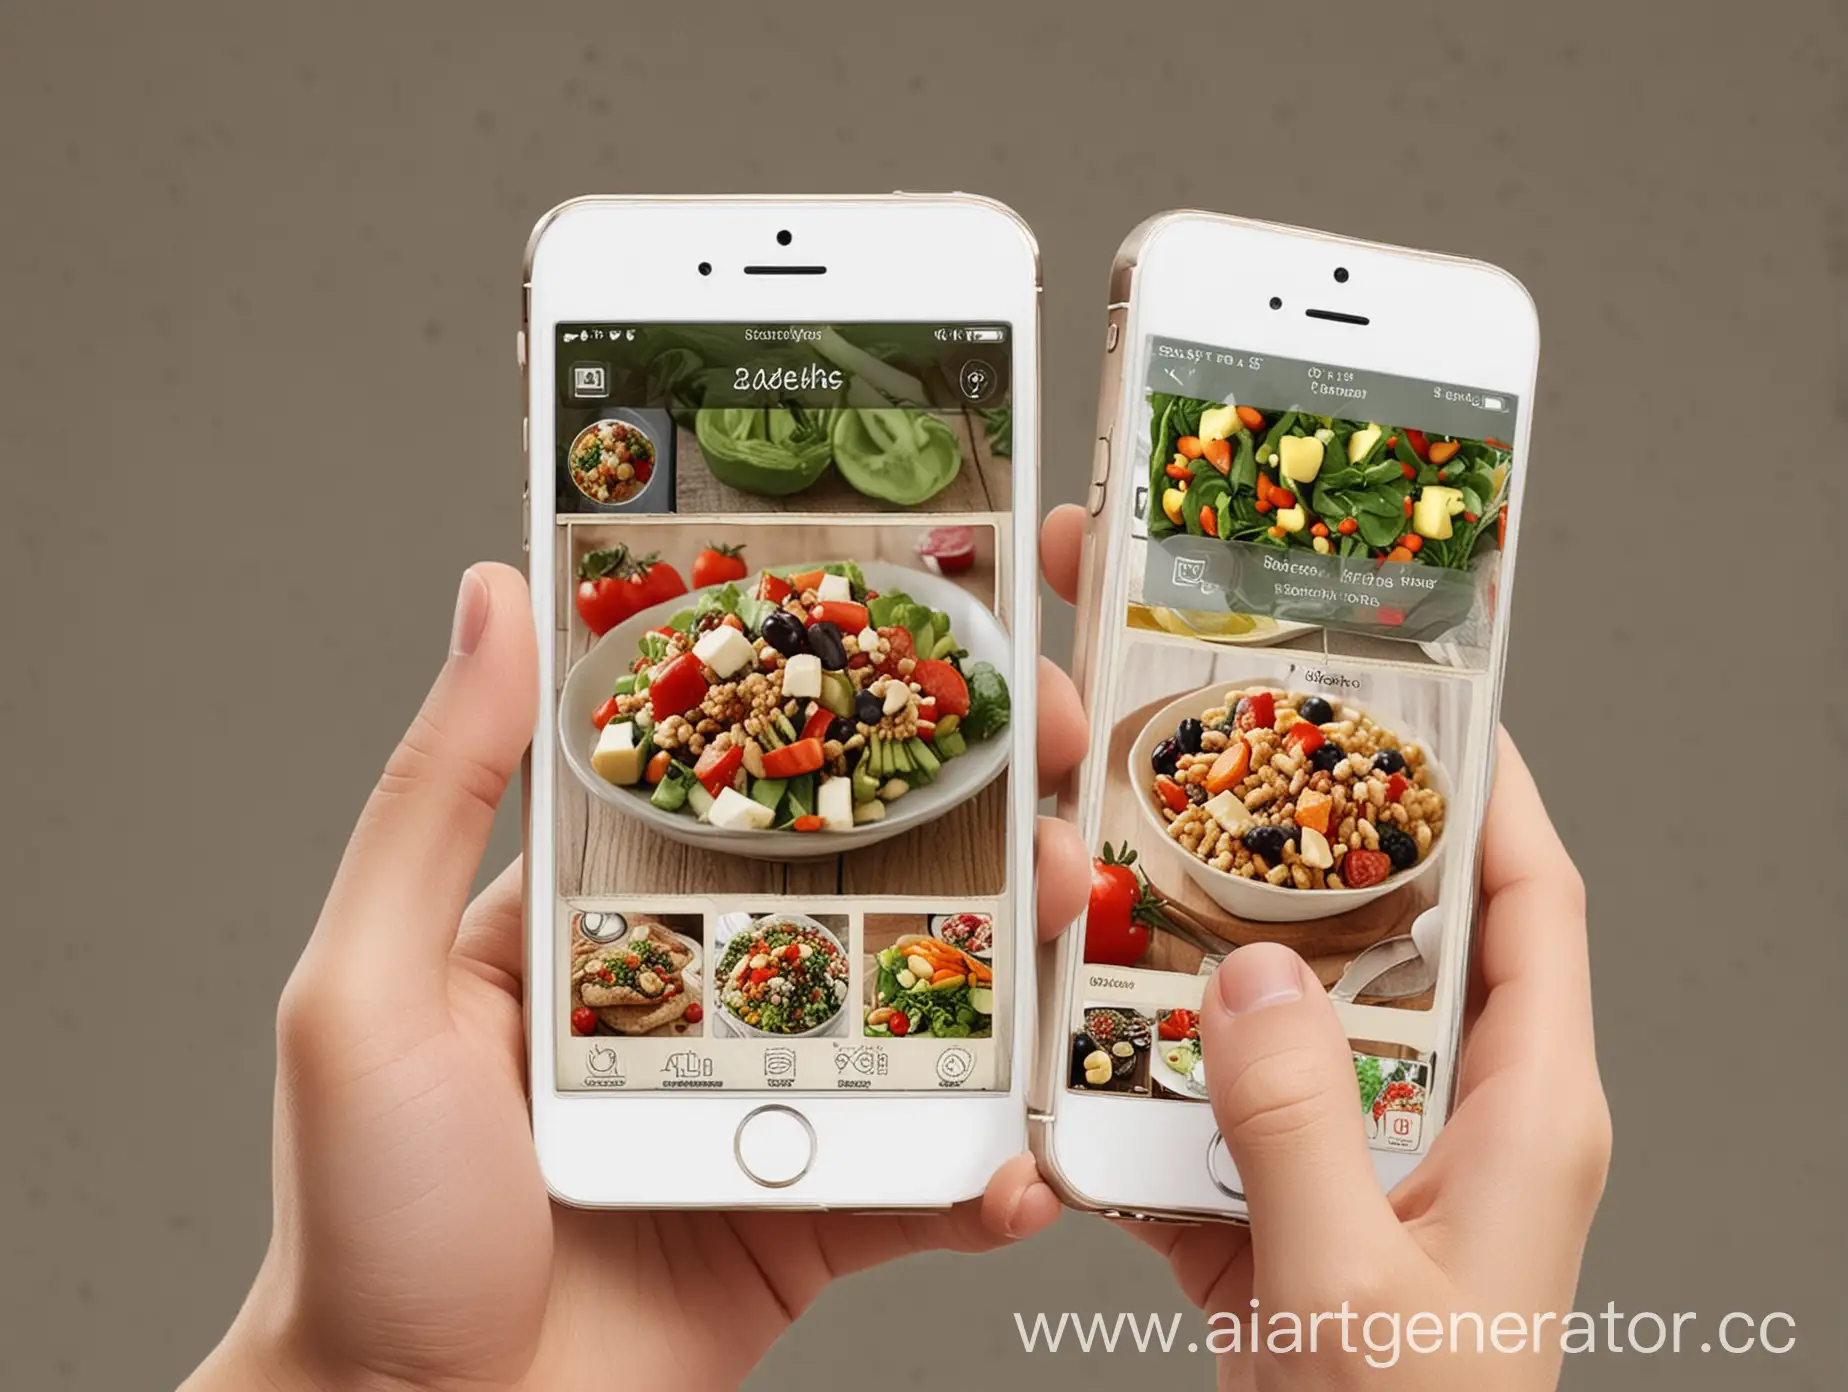 Kids-and-Teens-Sharing-Easy-Healthy-Recipes-Deliciously-and-Healthily-App